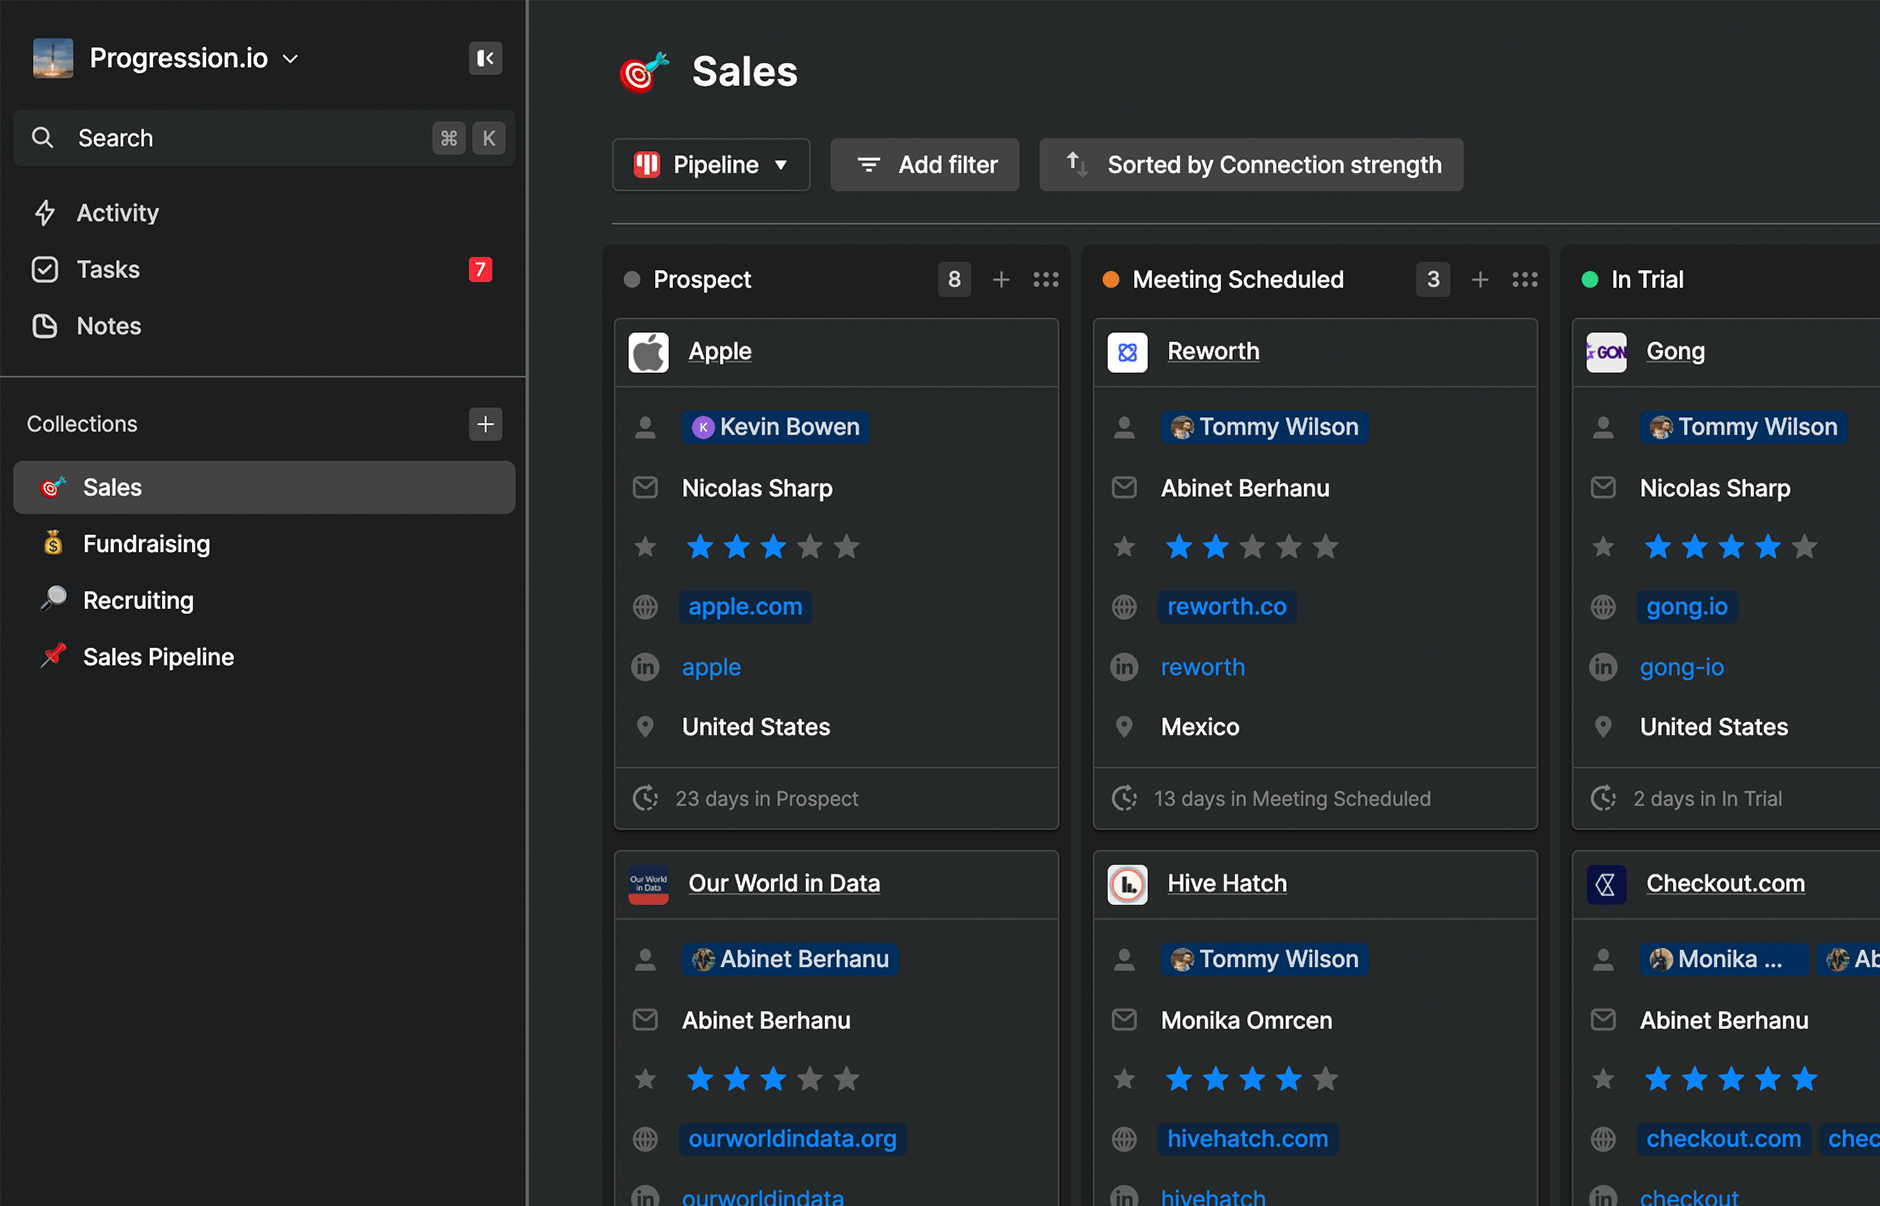 A typical kanban view is shown, with Attio in dark mode. The background is a dark grey instead of white, and the text is white and blue instead of black and grey.